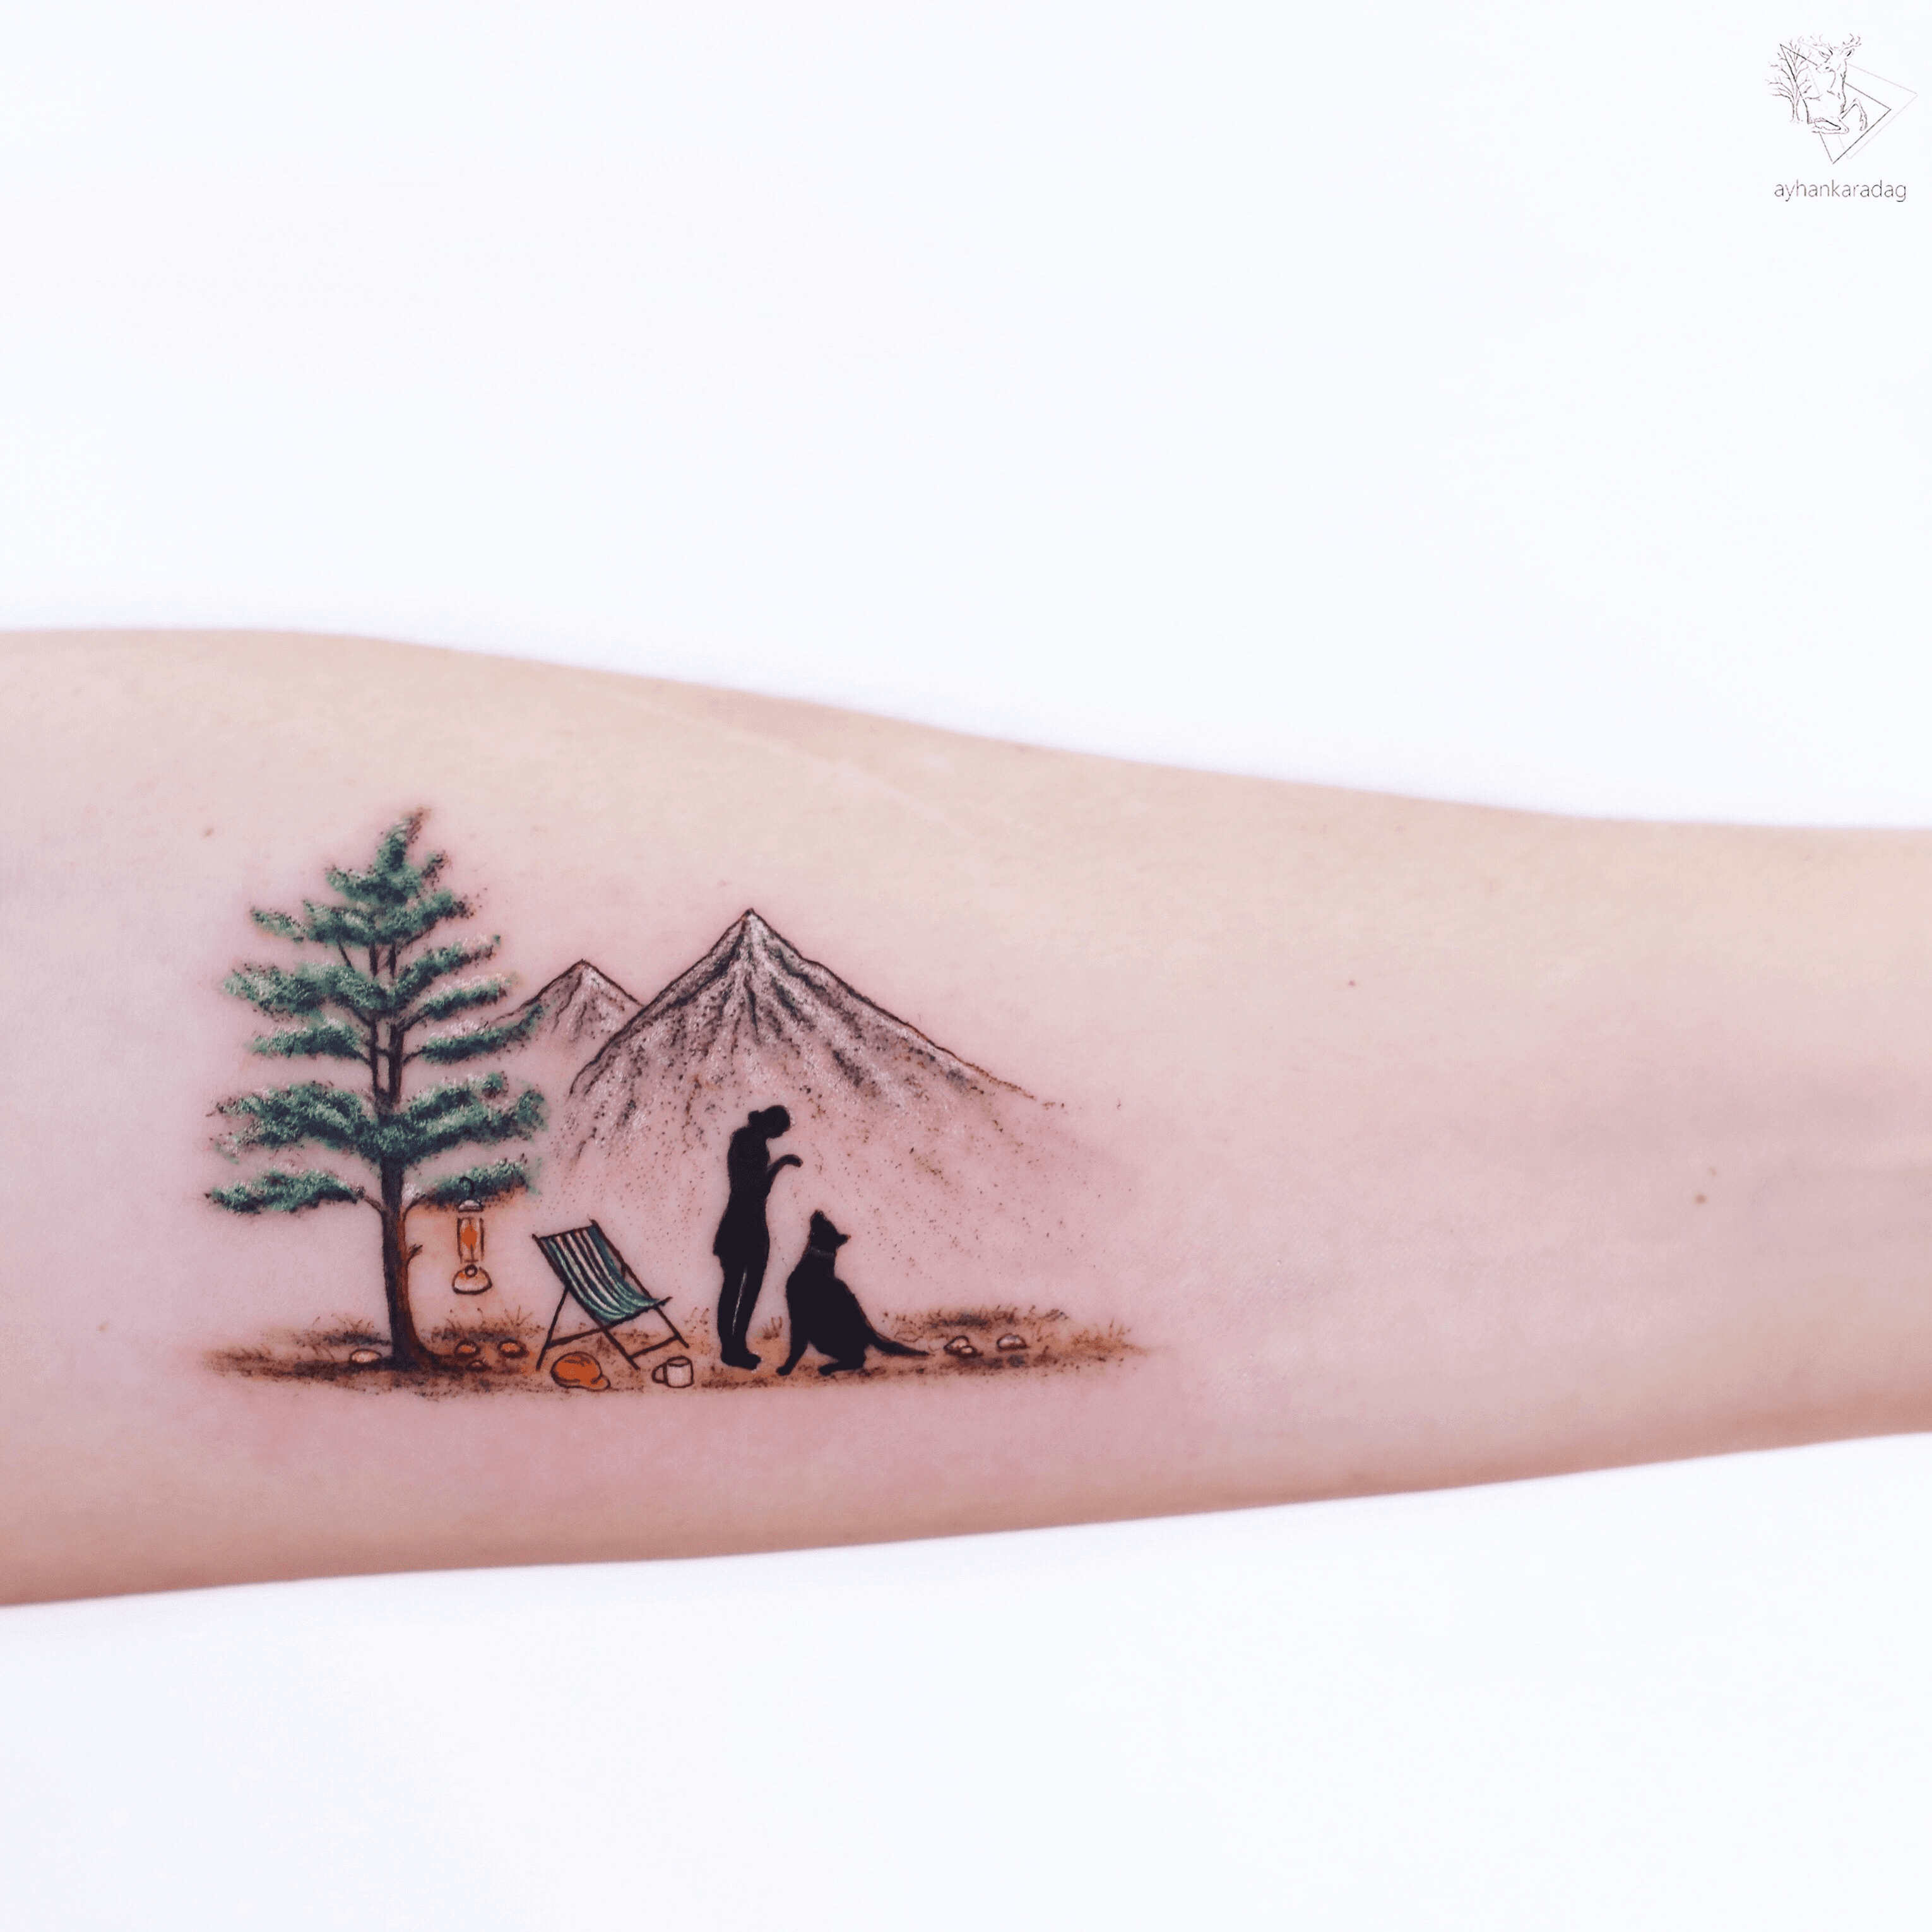 38 Tattoo Ideas for People Who Love to Camp